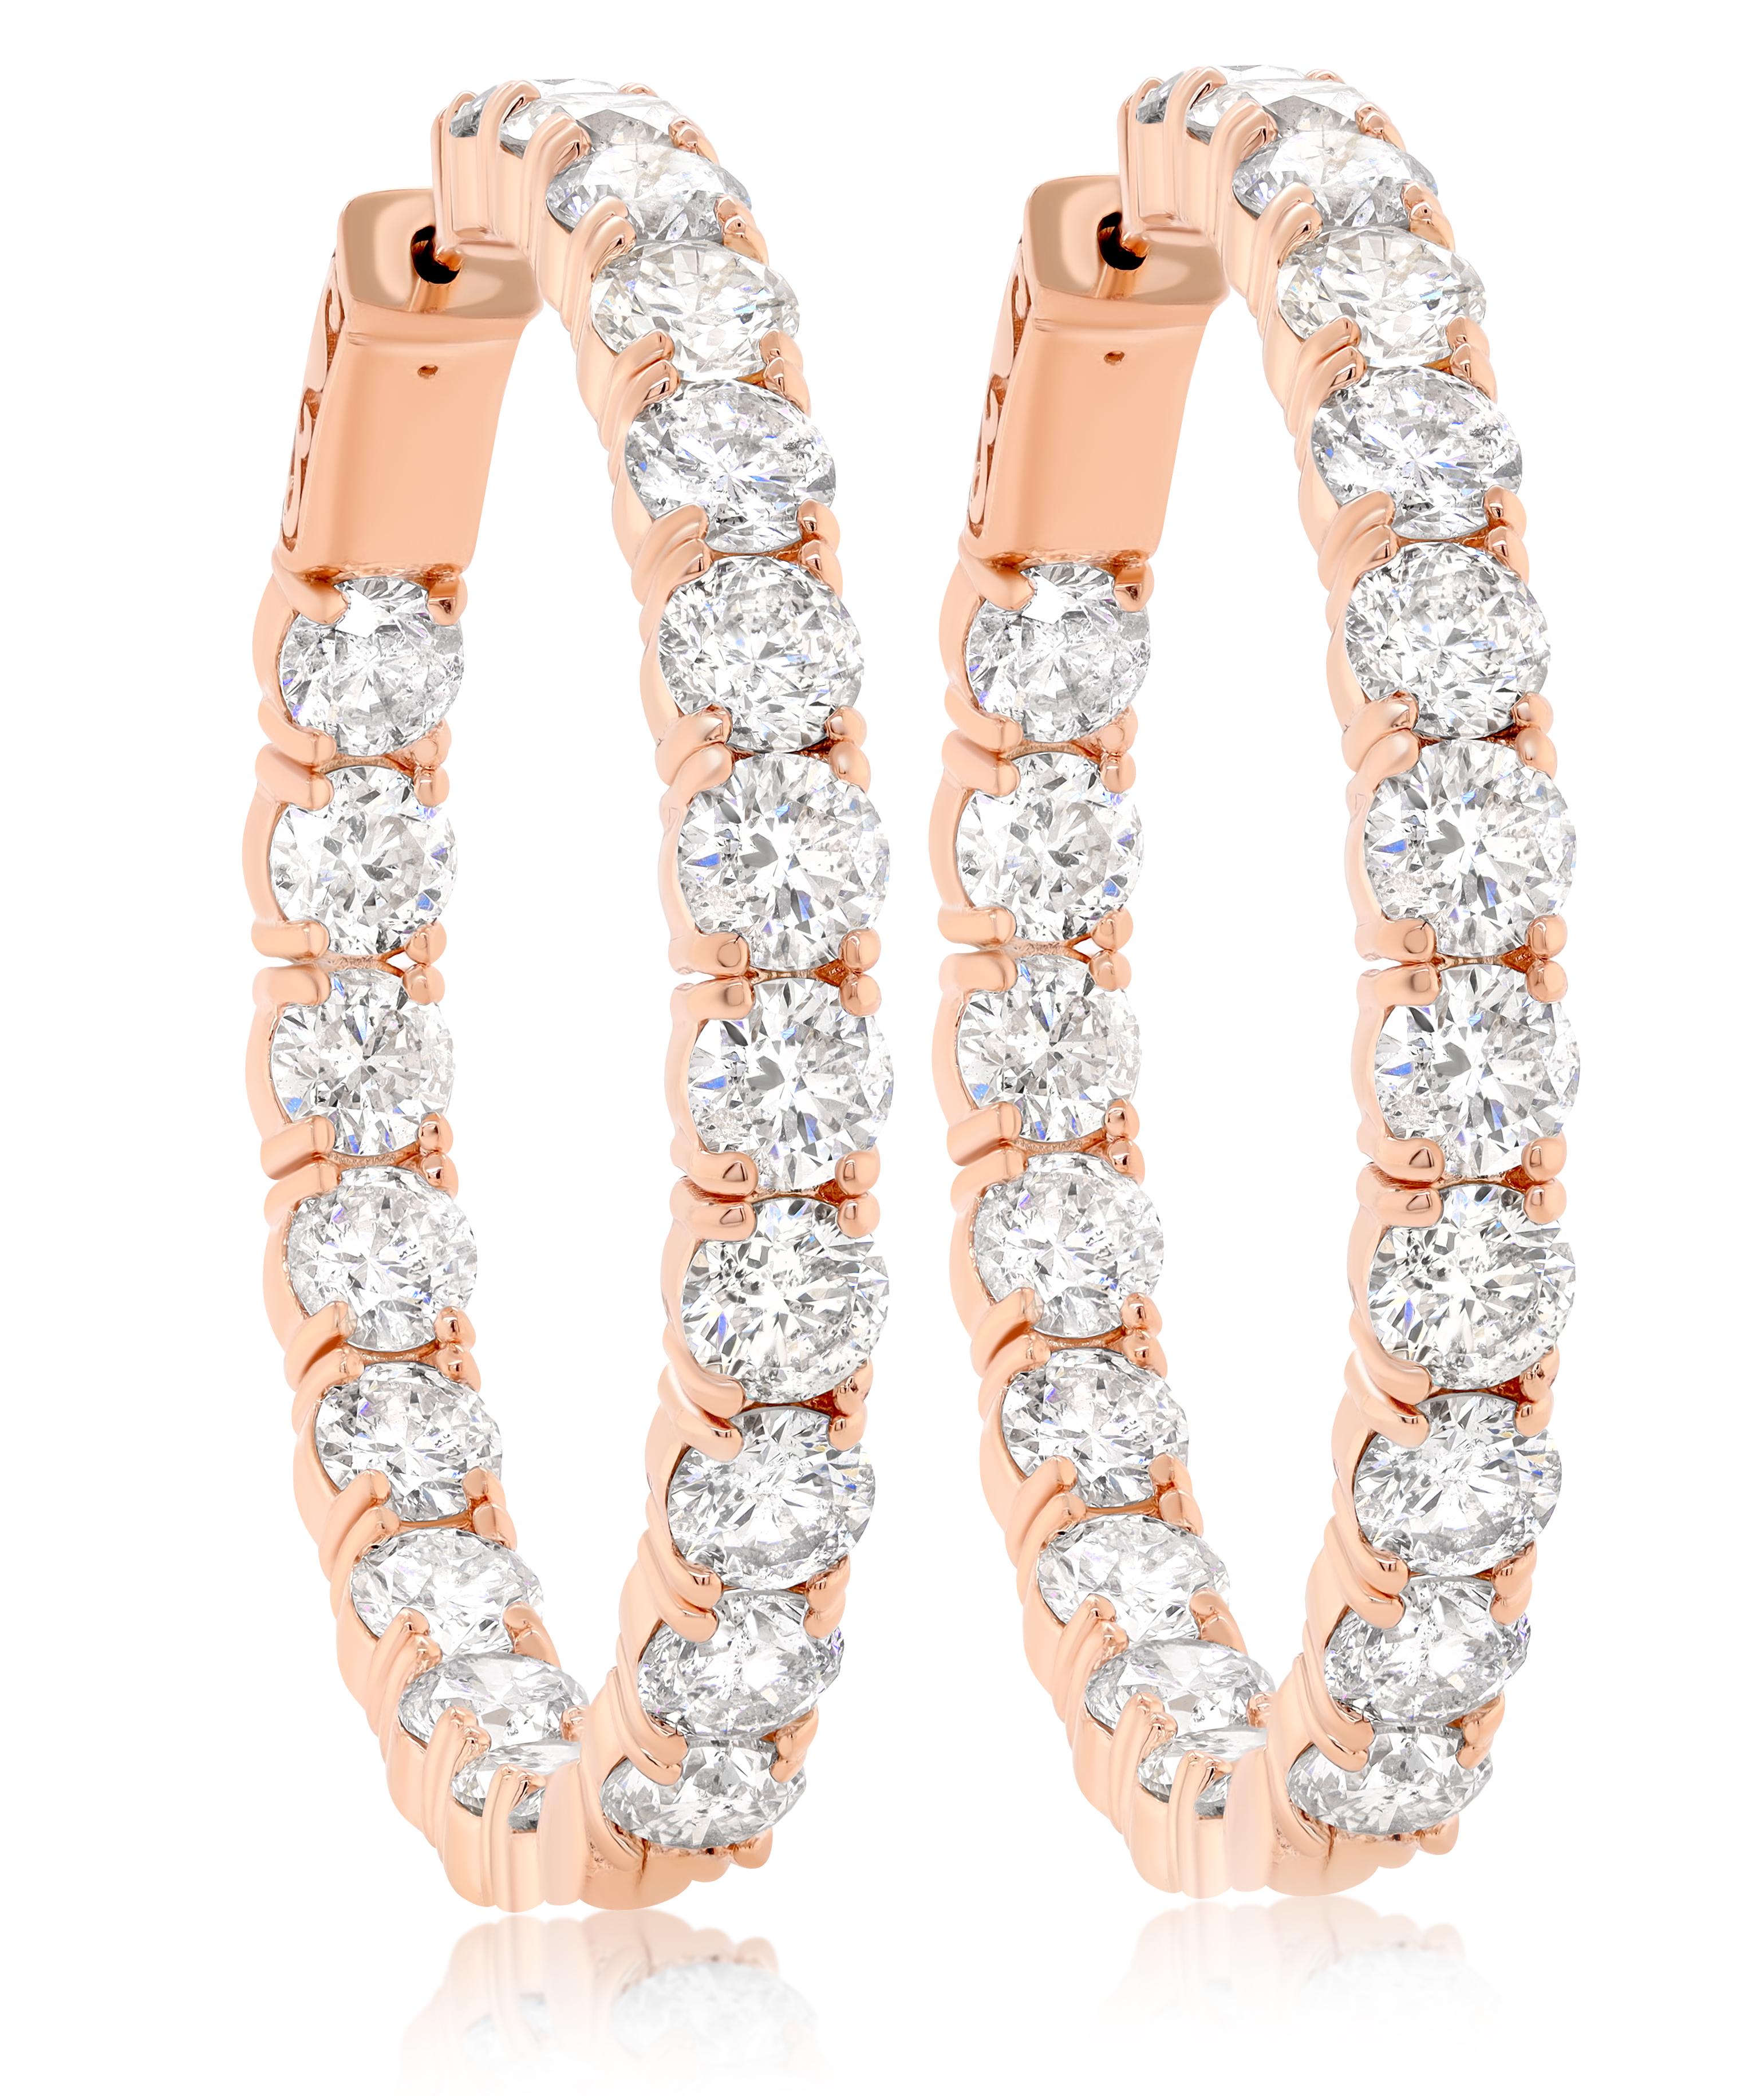 18K Rose Gold Diamond Earrings featuring 12.75  Carats of Diamonds

Underline your look with this sharp 18K Rose gold clover shape Diamond Earrings. High quality Diamonds. This Earrings will underline your exquisite look for any occasion.

. is a